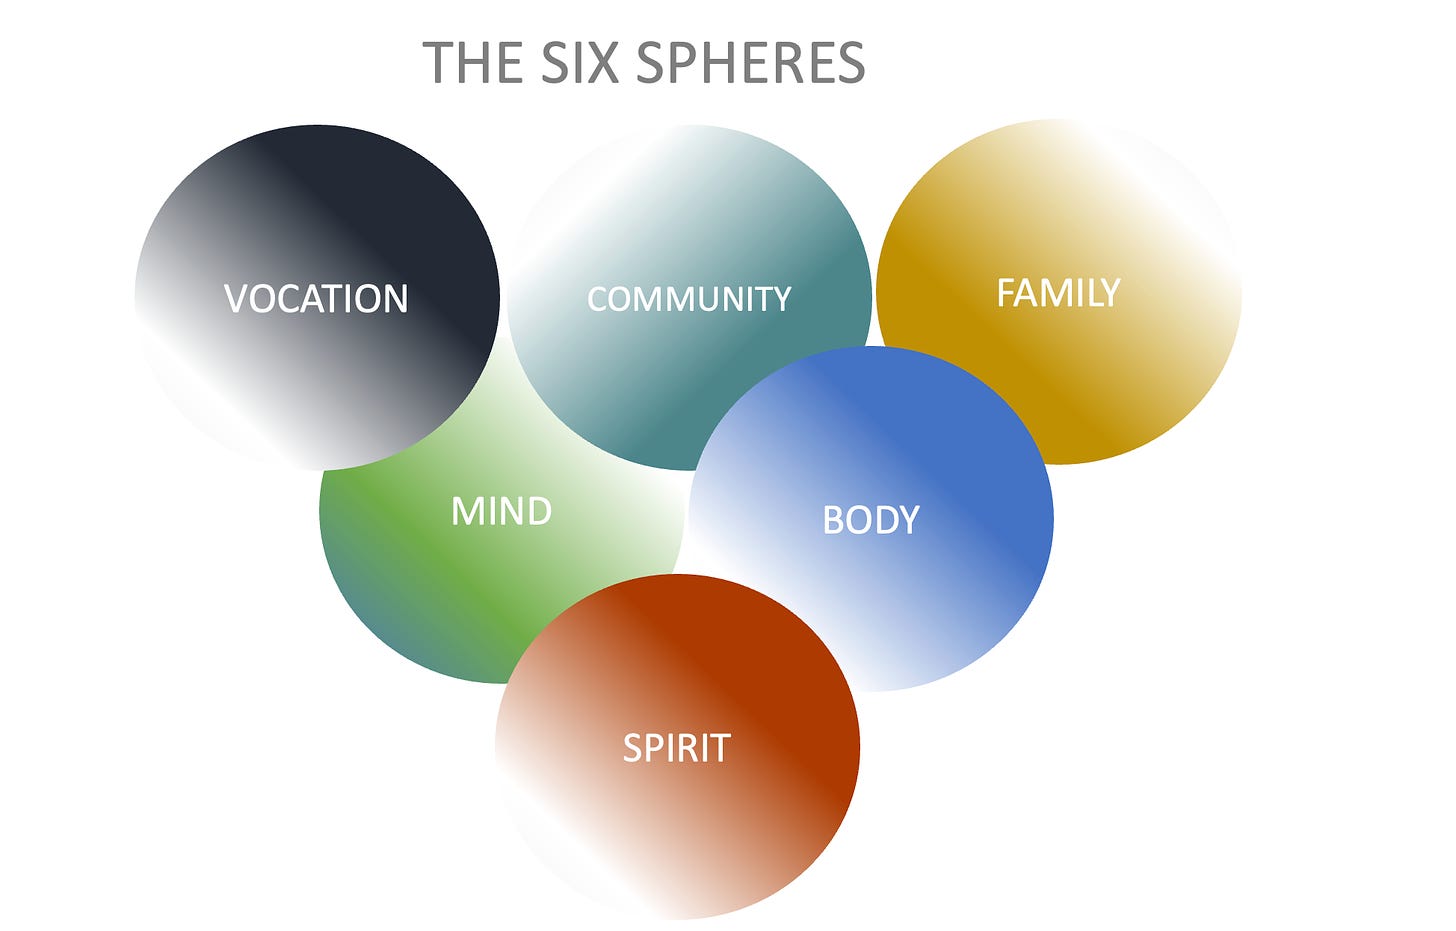 the six spheres are vocation , community, family, mind, body, and spirit